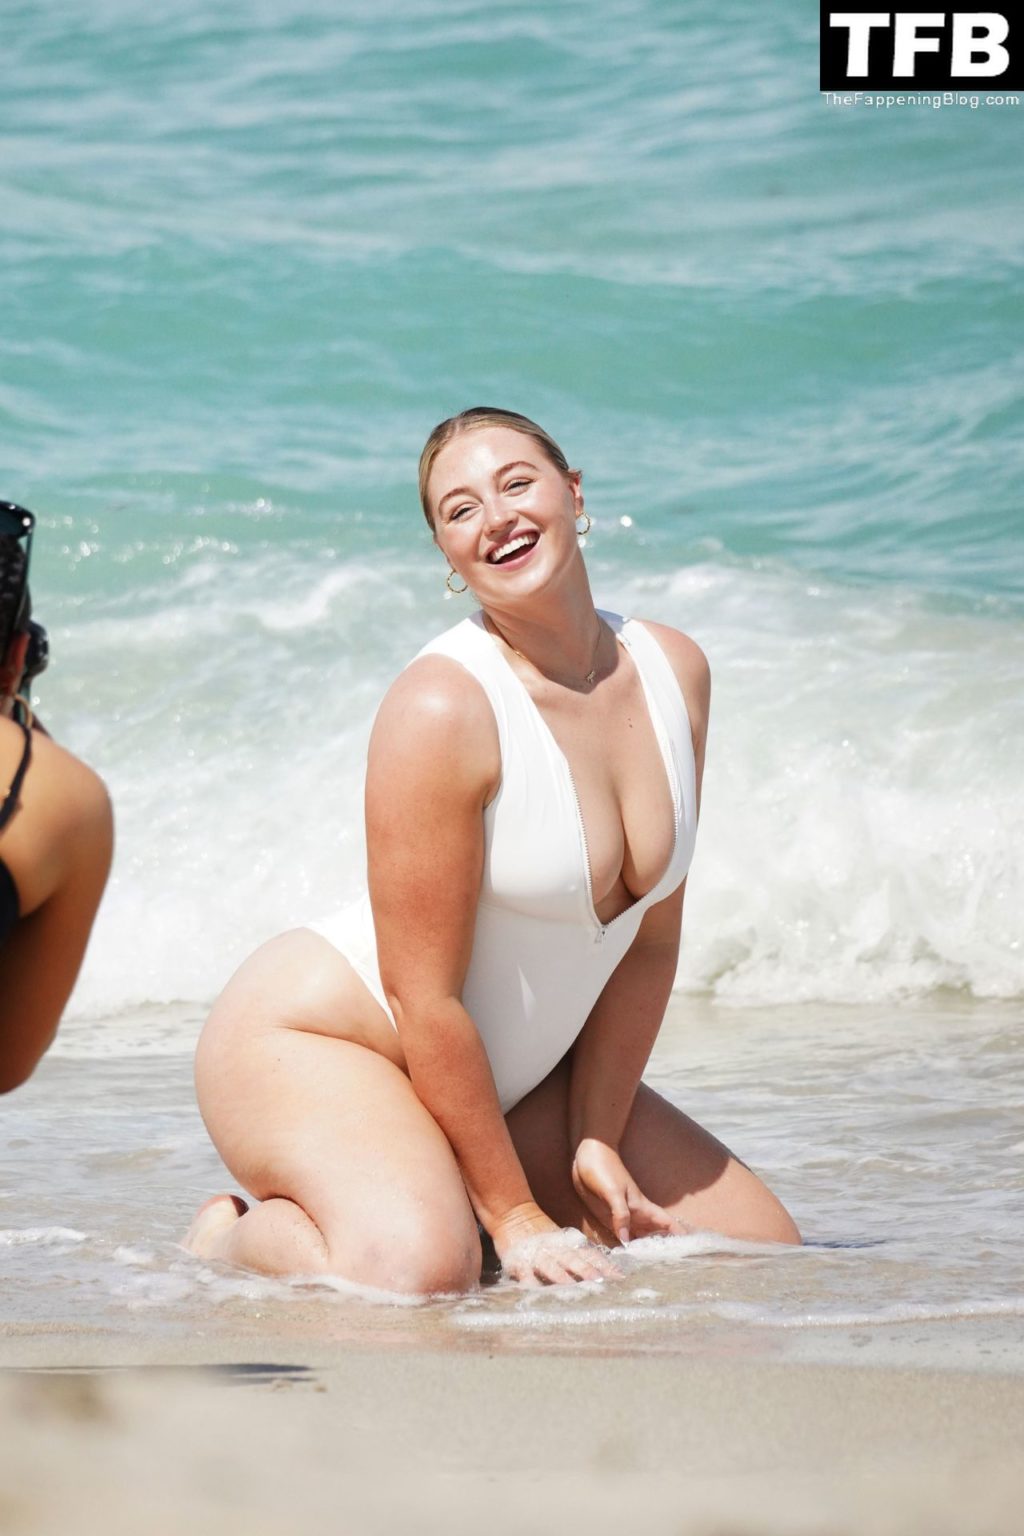 Iskra Lawrence Displays Her Curves on the Beach in Miami (21 Photos)